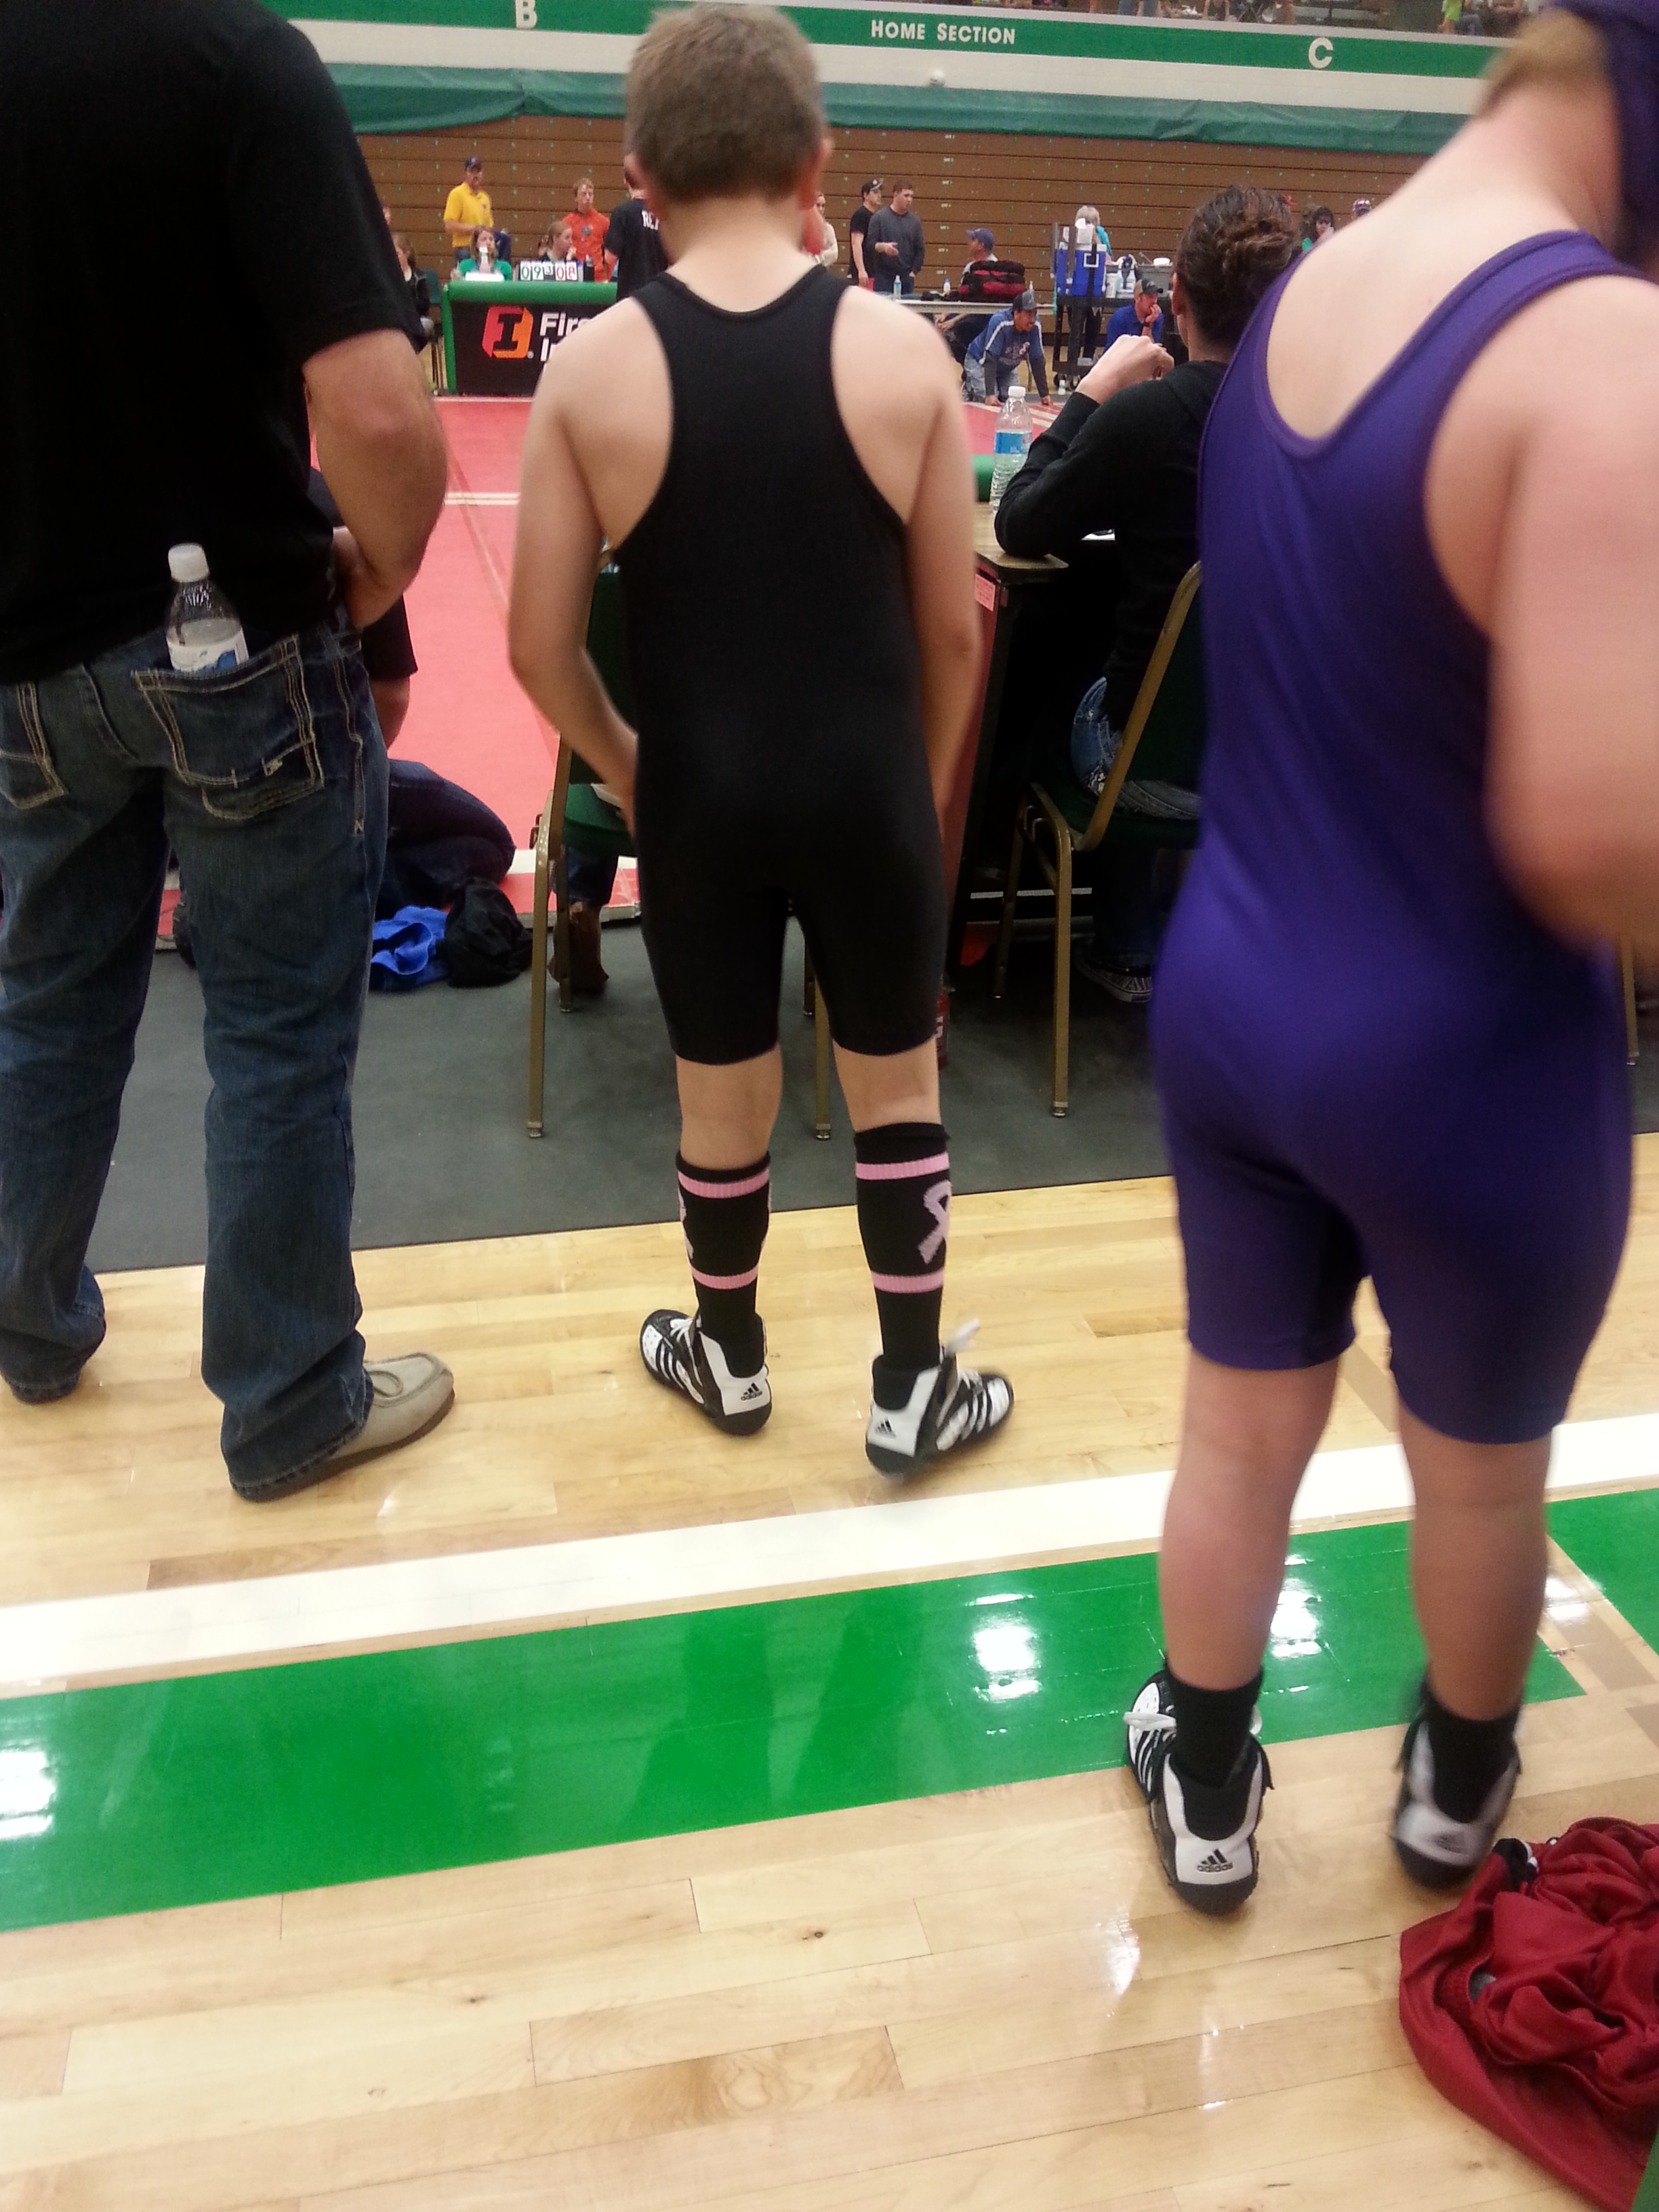 Along with acting, JD is also a State Champion Little Guy wrestler